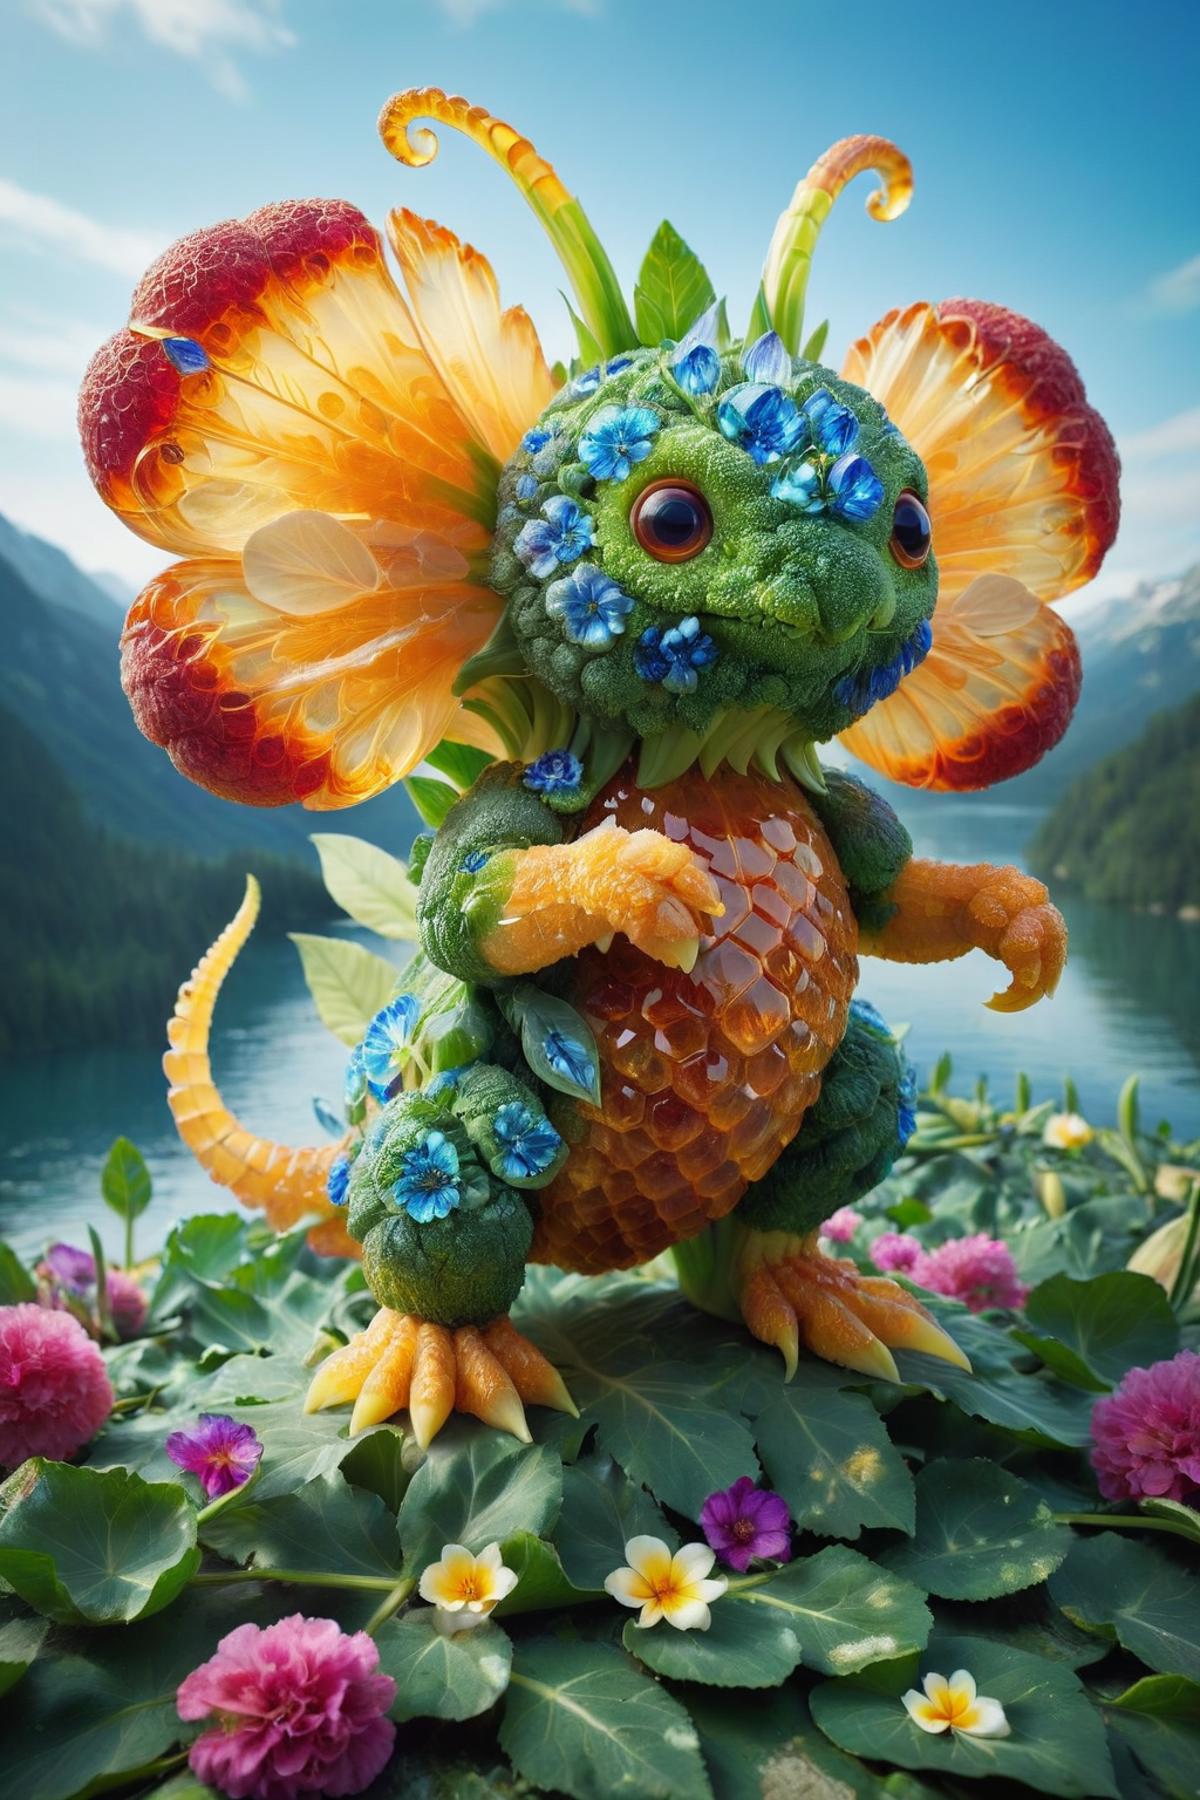 A beautifully crafted toy dinosaur with a flower on its head.